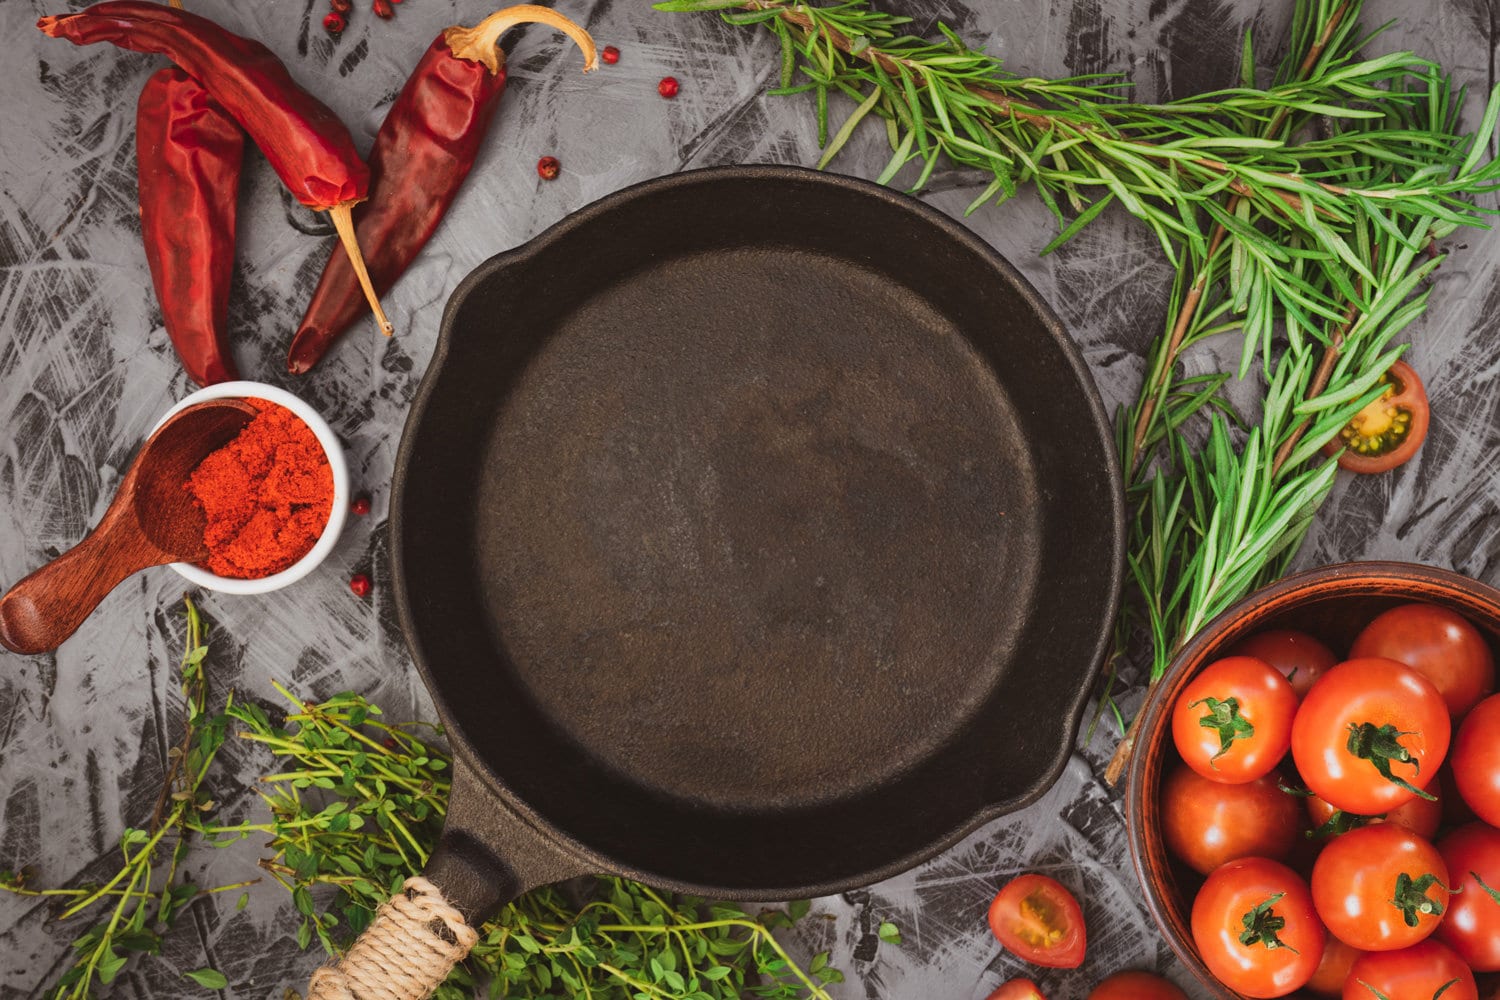 Cast iron pan on concrete background with red ripe tomatoes and red pepper 